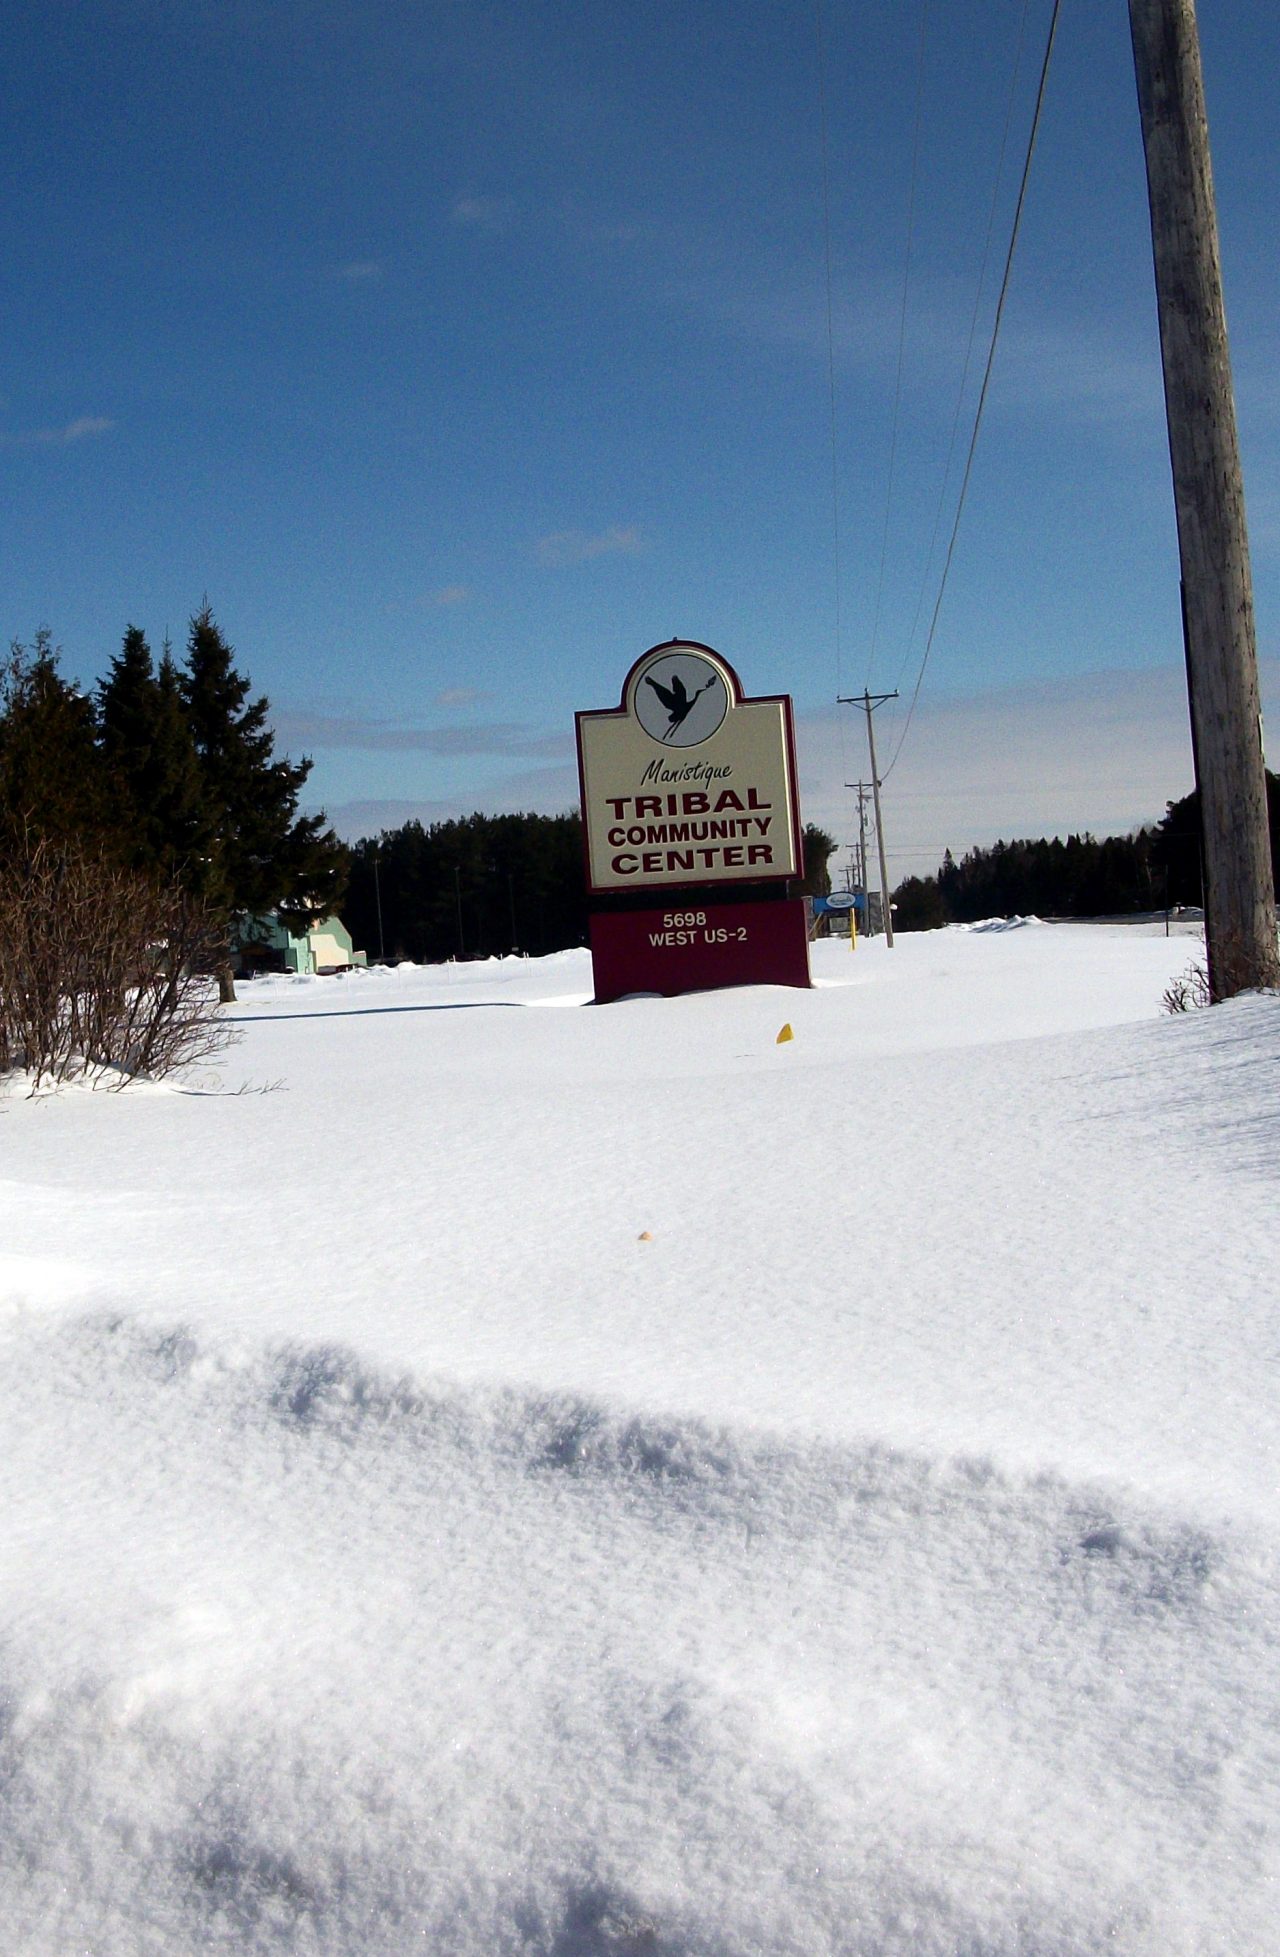 A town sign on a snow-covered road.